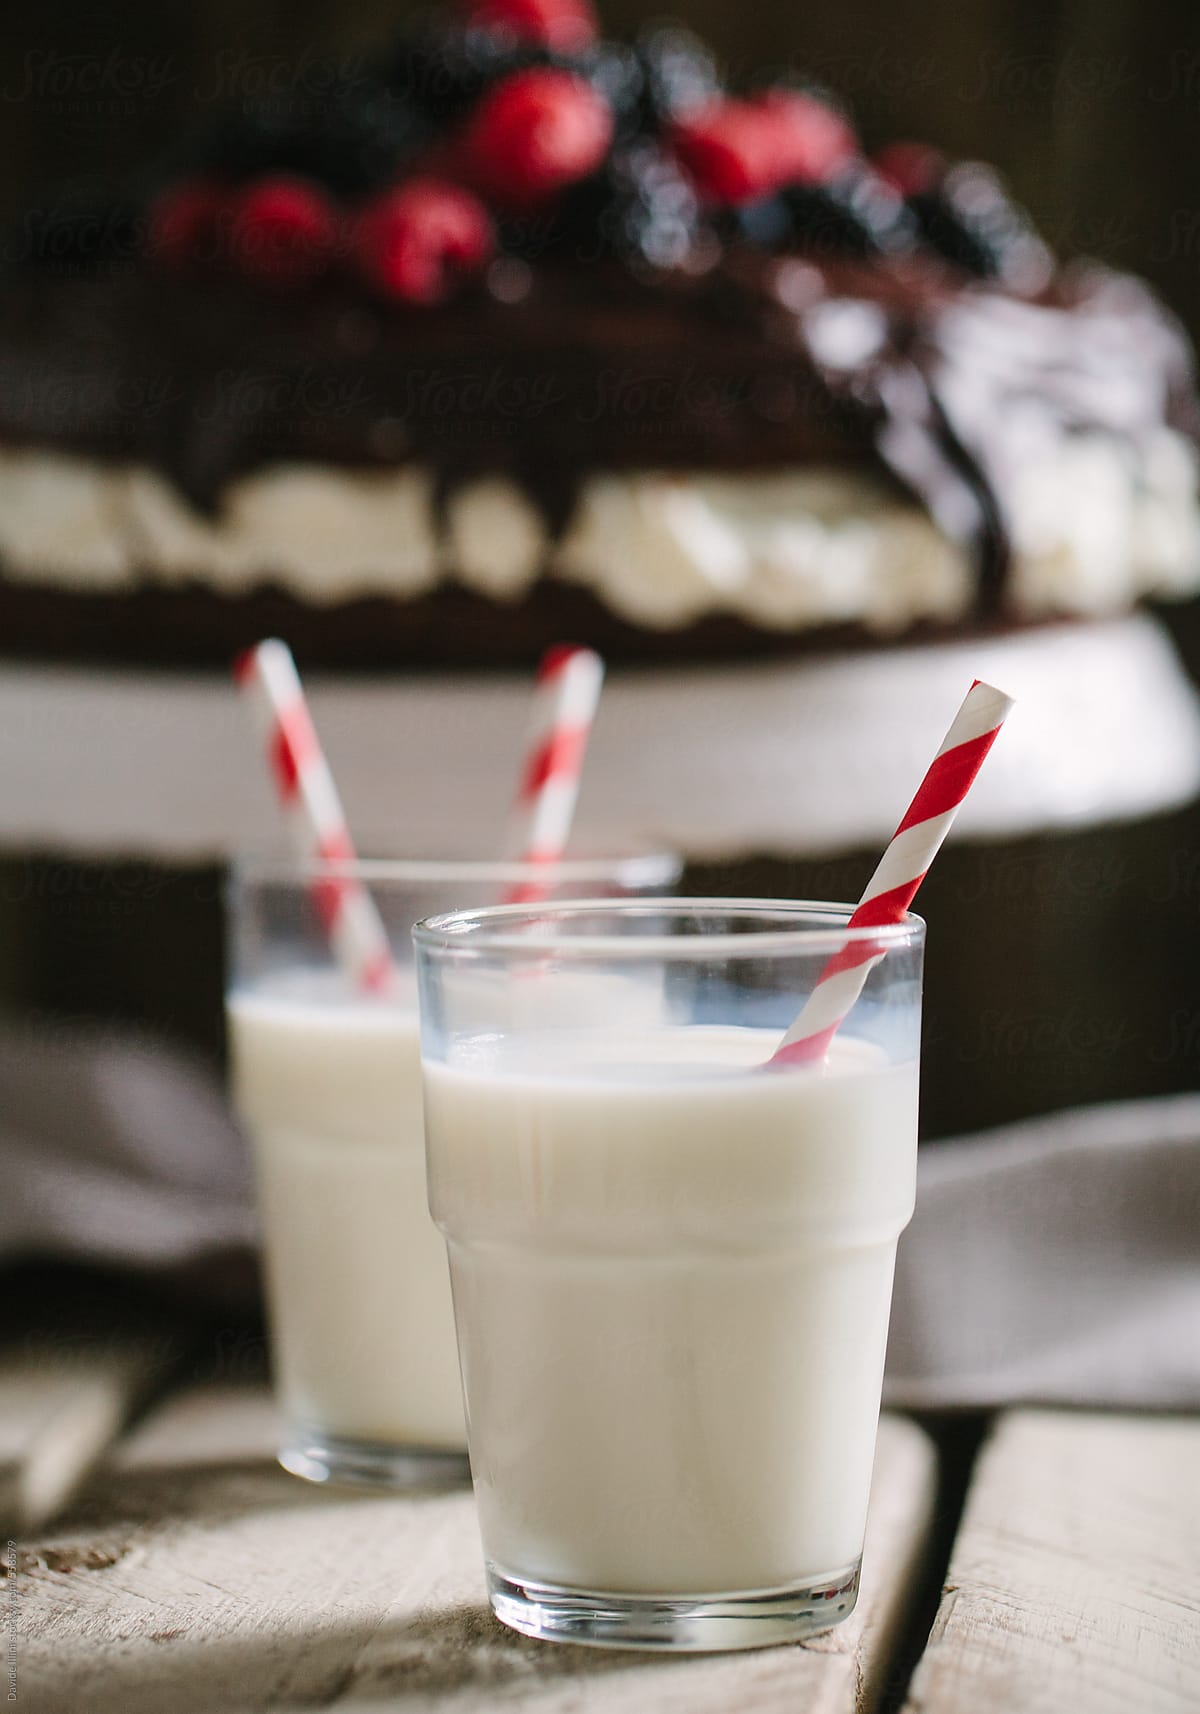 Two glass of milk with striped straws standing on old table